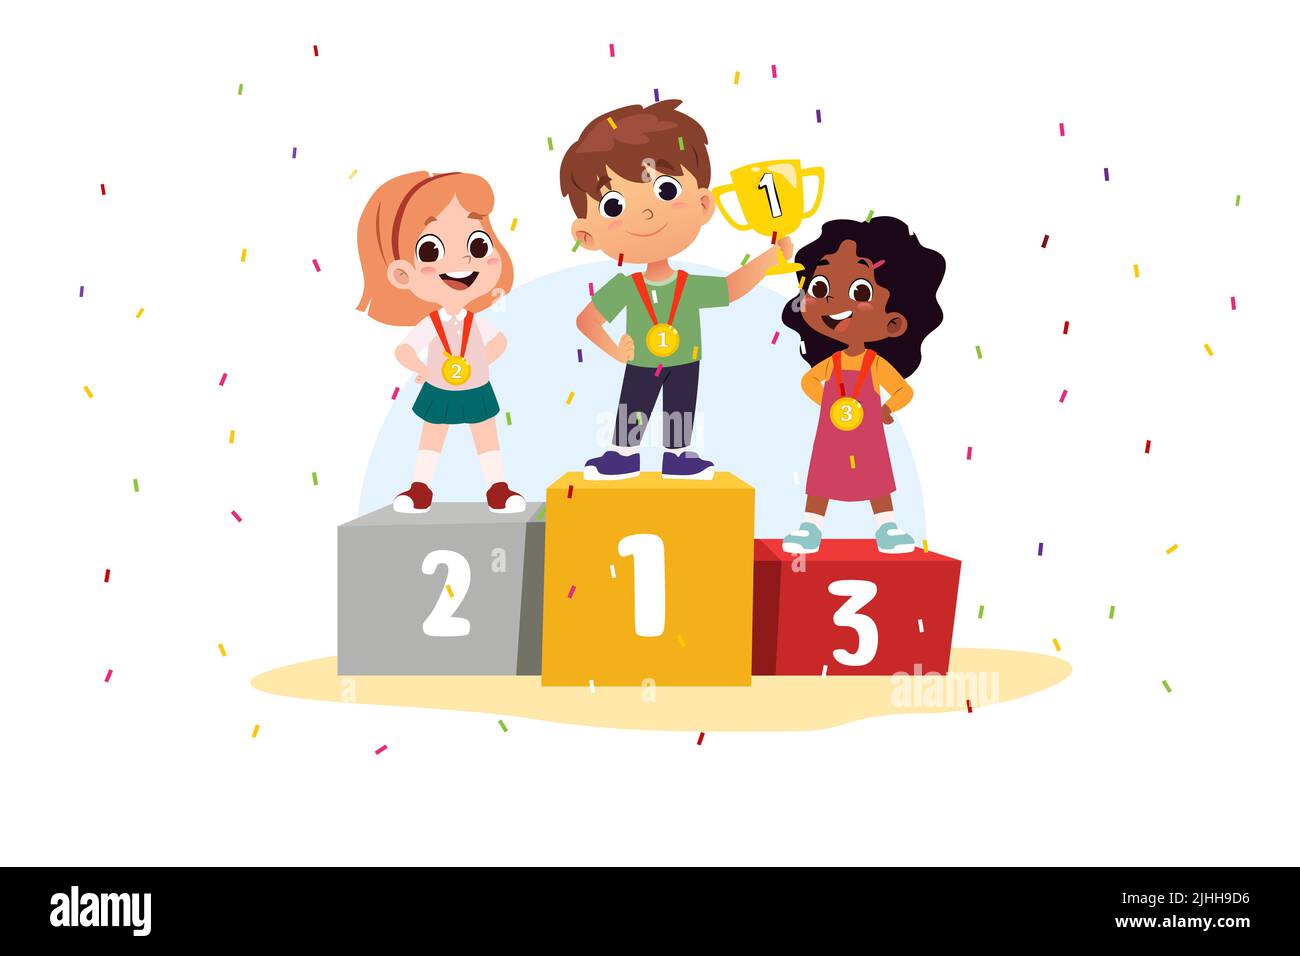 A vector illustration of Children in a Winning Podium Holding Trophy and Medals Stock Vector